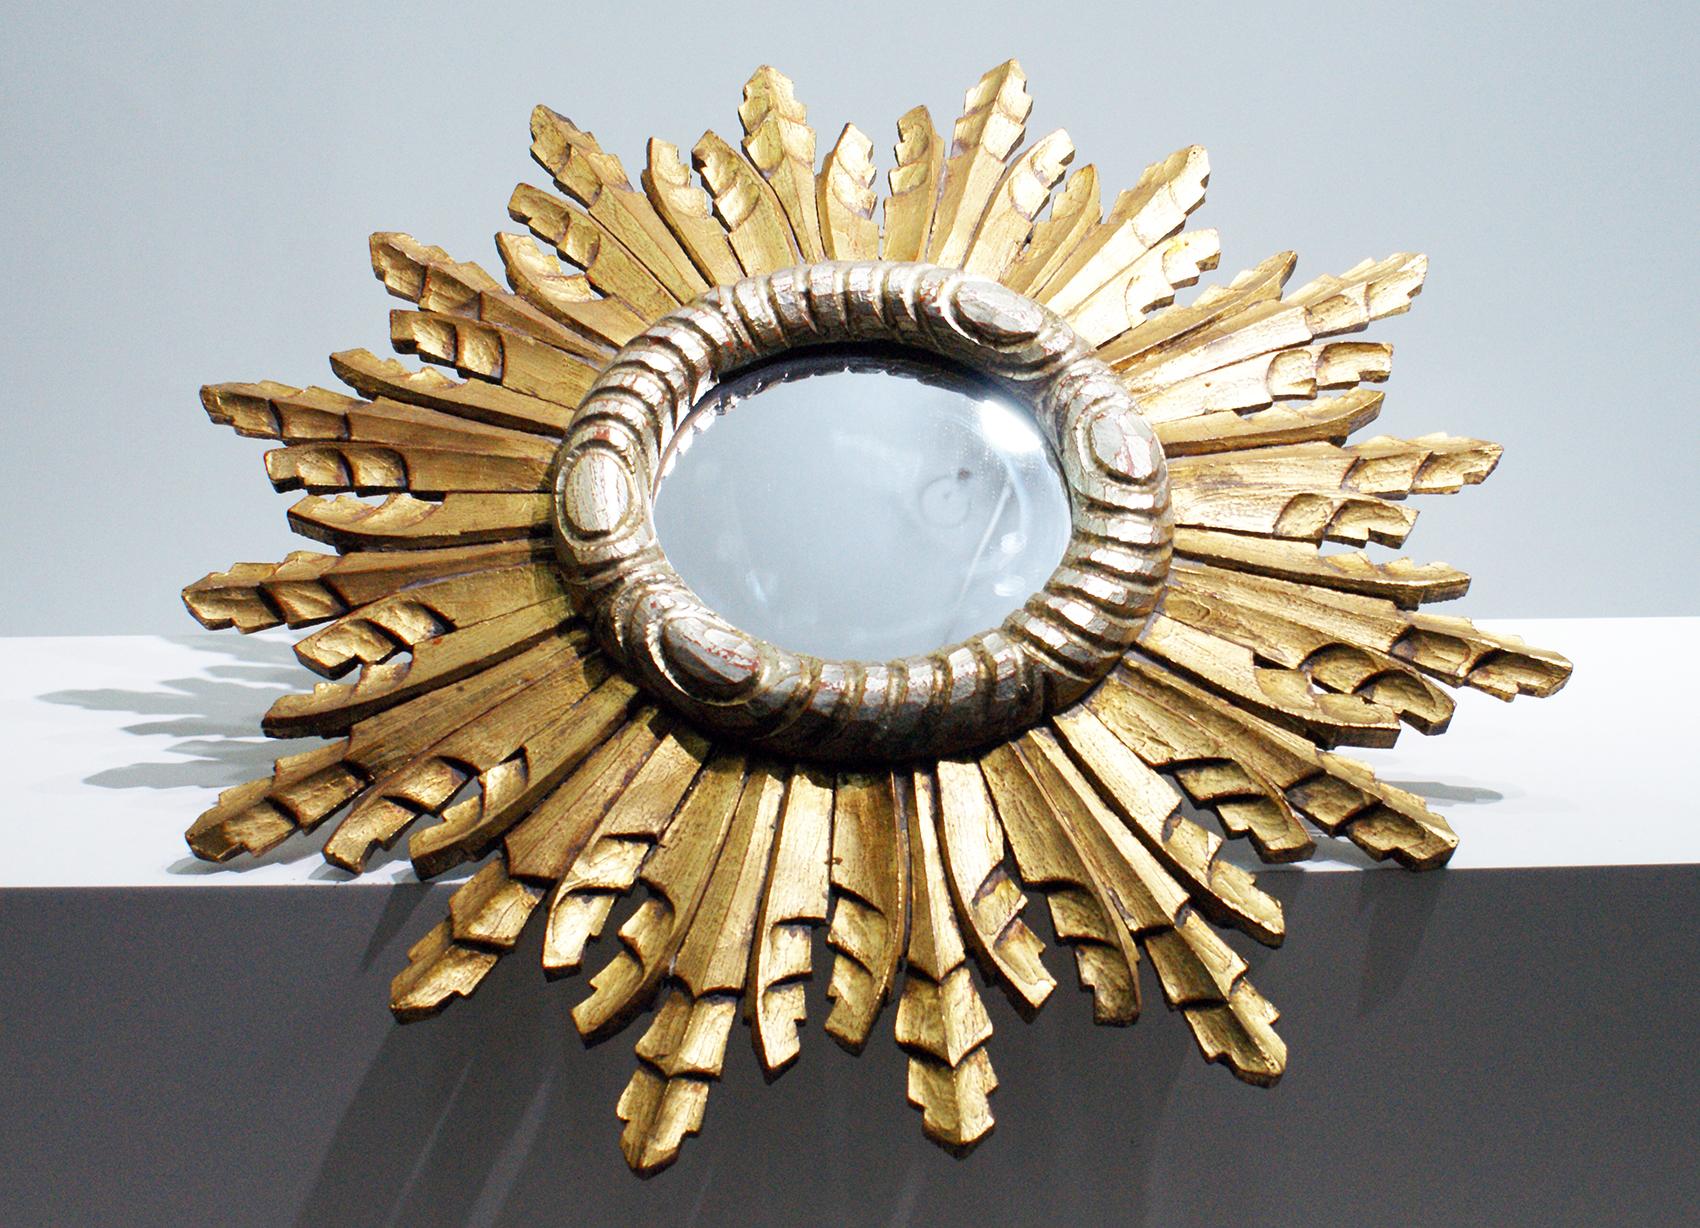 French gold sunburst mirror with carved decoration at the frame.
The mirror is surrounded by staggering lengths of silver and gilt colors sunbeams.